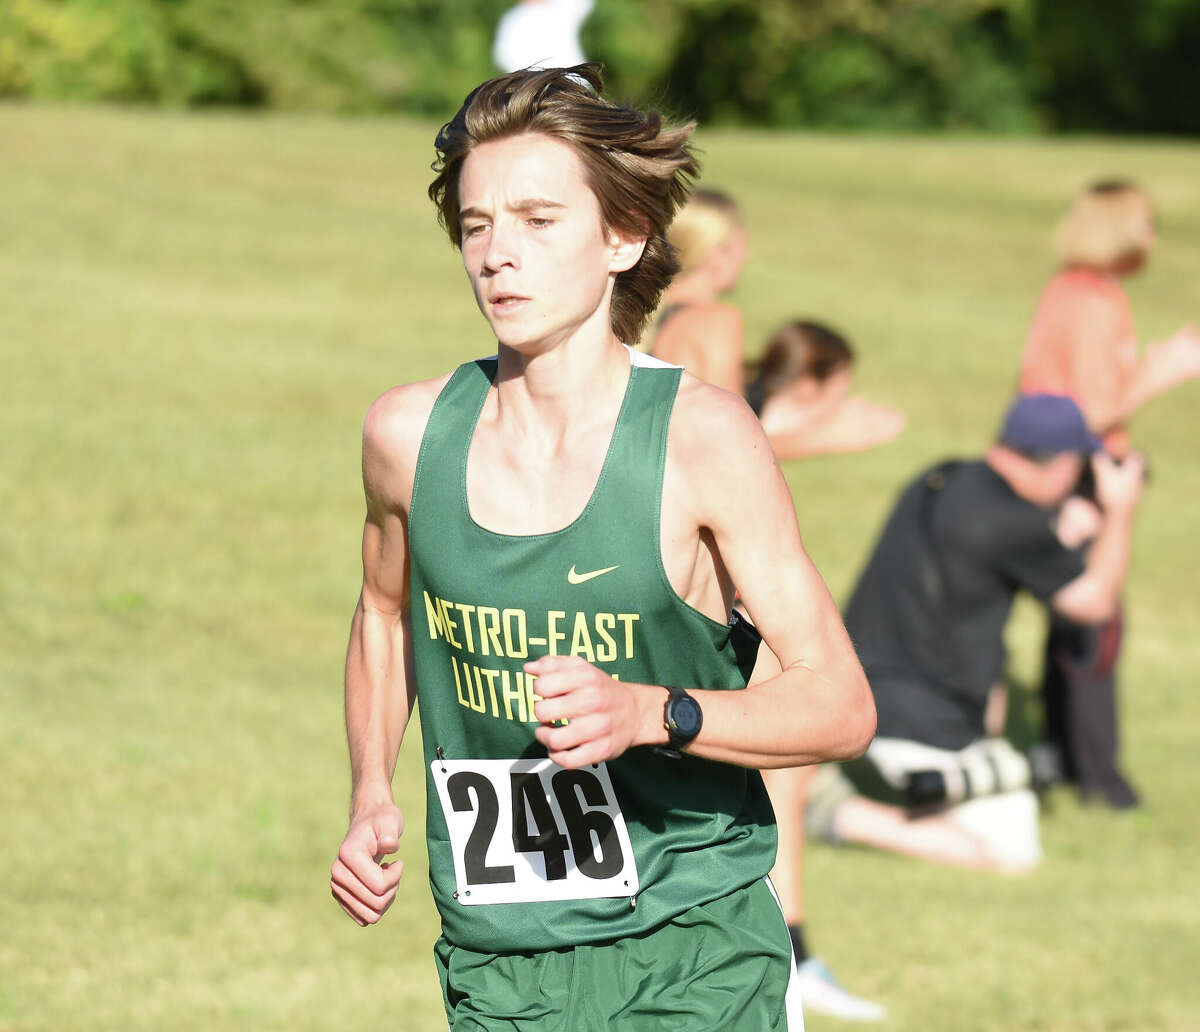 Metro-East Lutheran's Max Weber competes during the Madison County cross country meet on Tuesday at Collinsville High School in Collinsville.